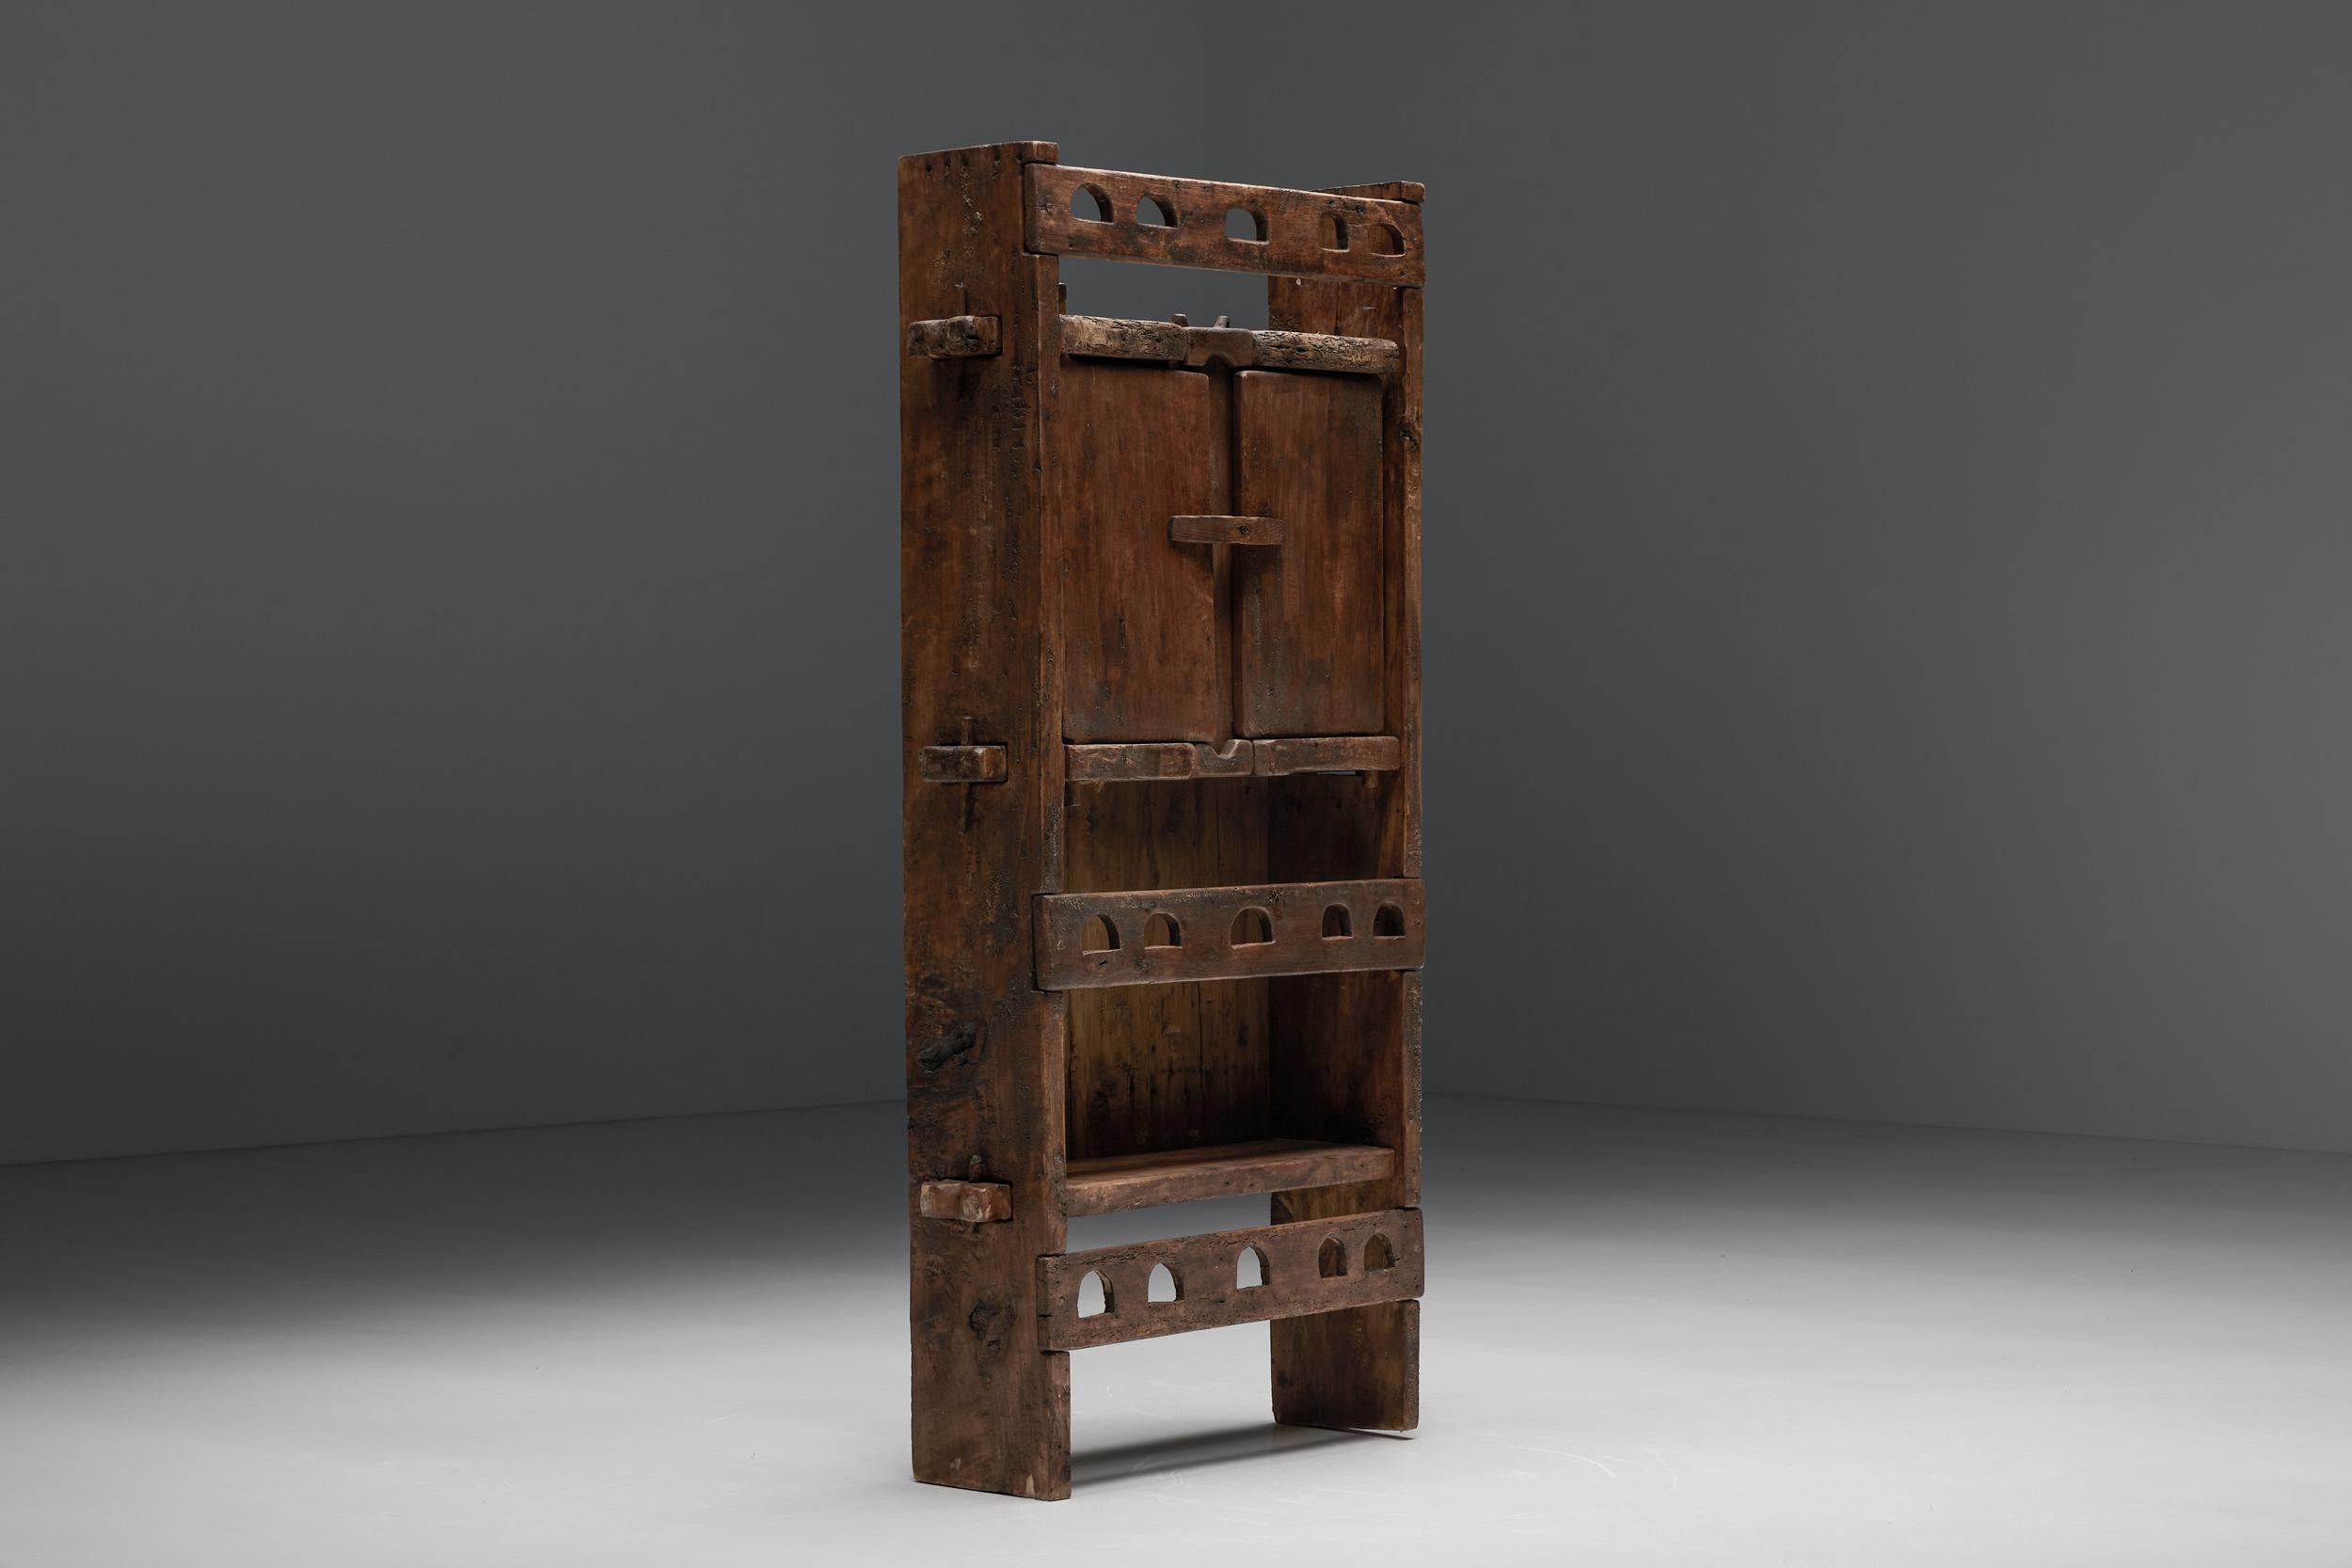 Natural; Rustic; Robust; Wabi-Sabi; cabinet; Cupboard; 1940s; Woodworking; French Craftsmanship;

This French natural wooden cabinet, dating from the 1940s, has two doors at the top and a shelve at the bottom. It's a rustic cupboard that provides